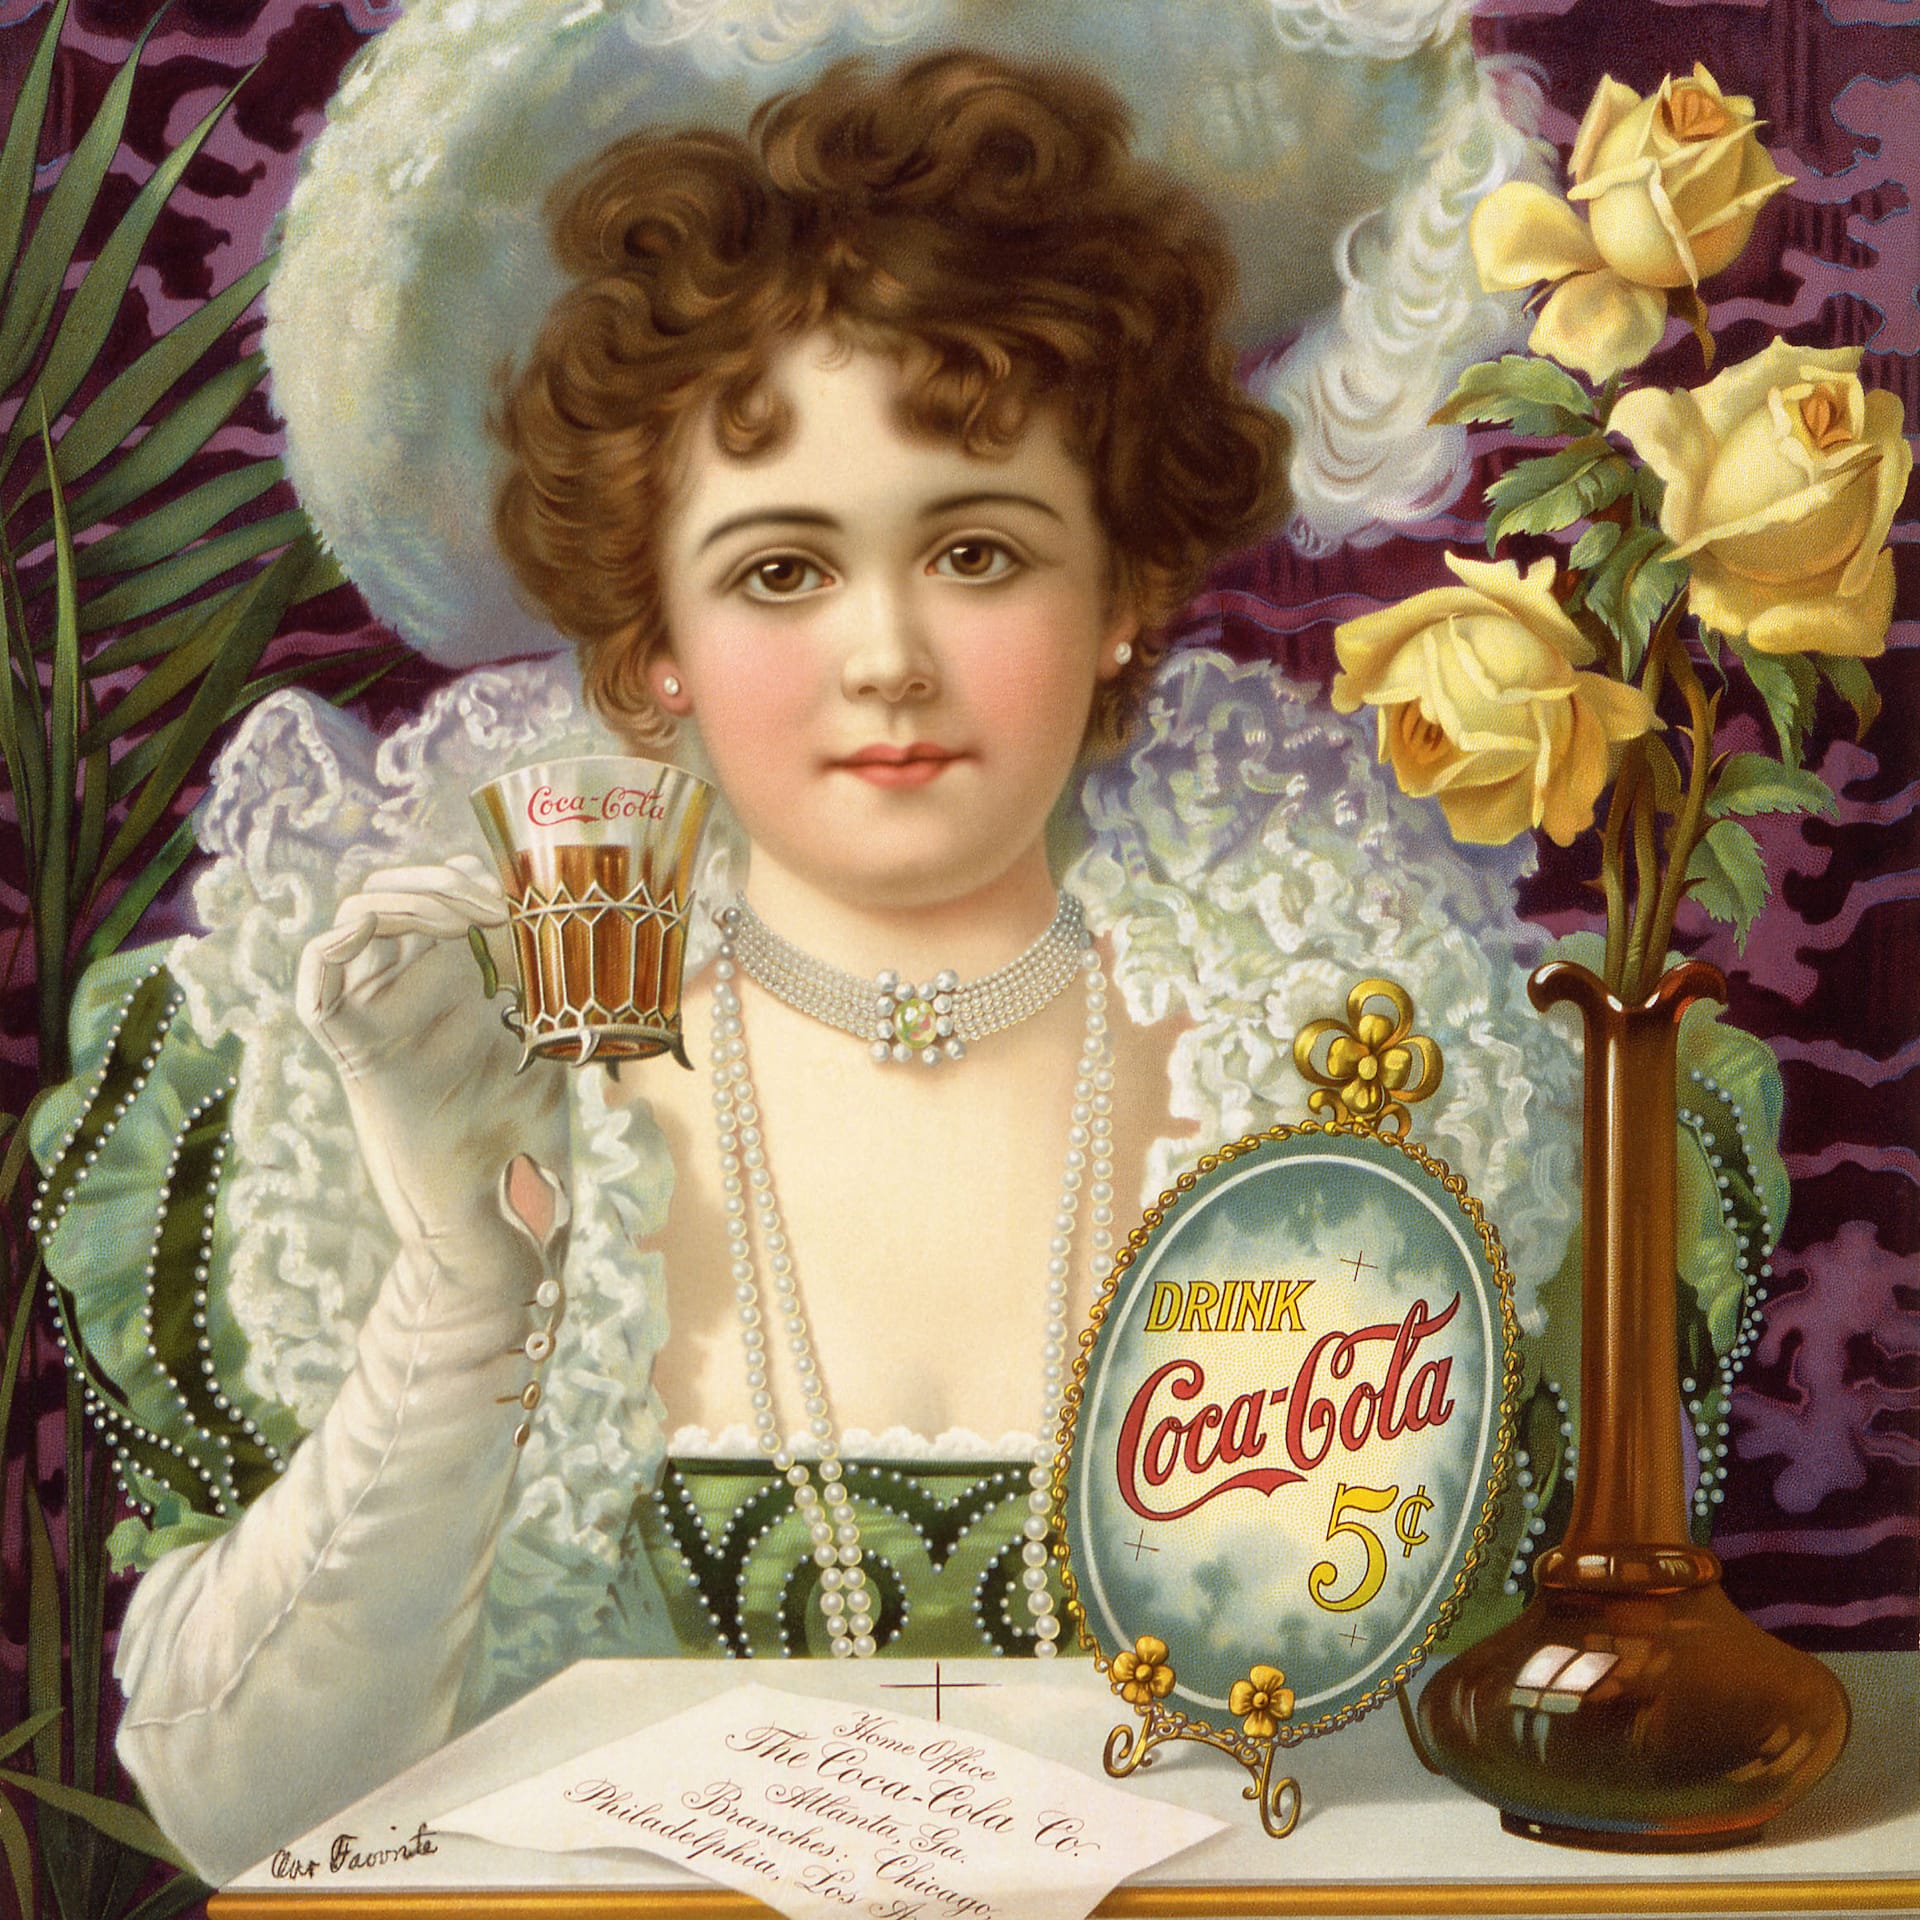 Tackle Today: Stock of the Week: Coke (illustration: "Drink Coca-Cola 5¢", an 1890s advertising poster)